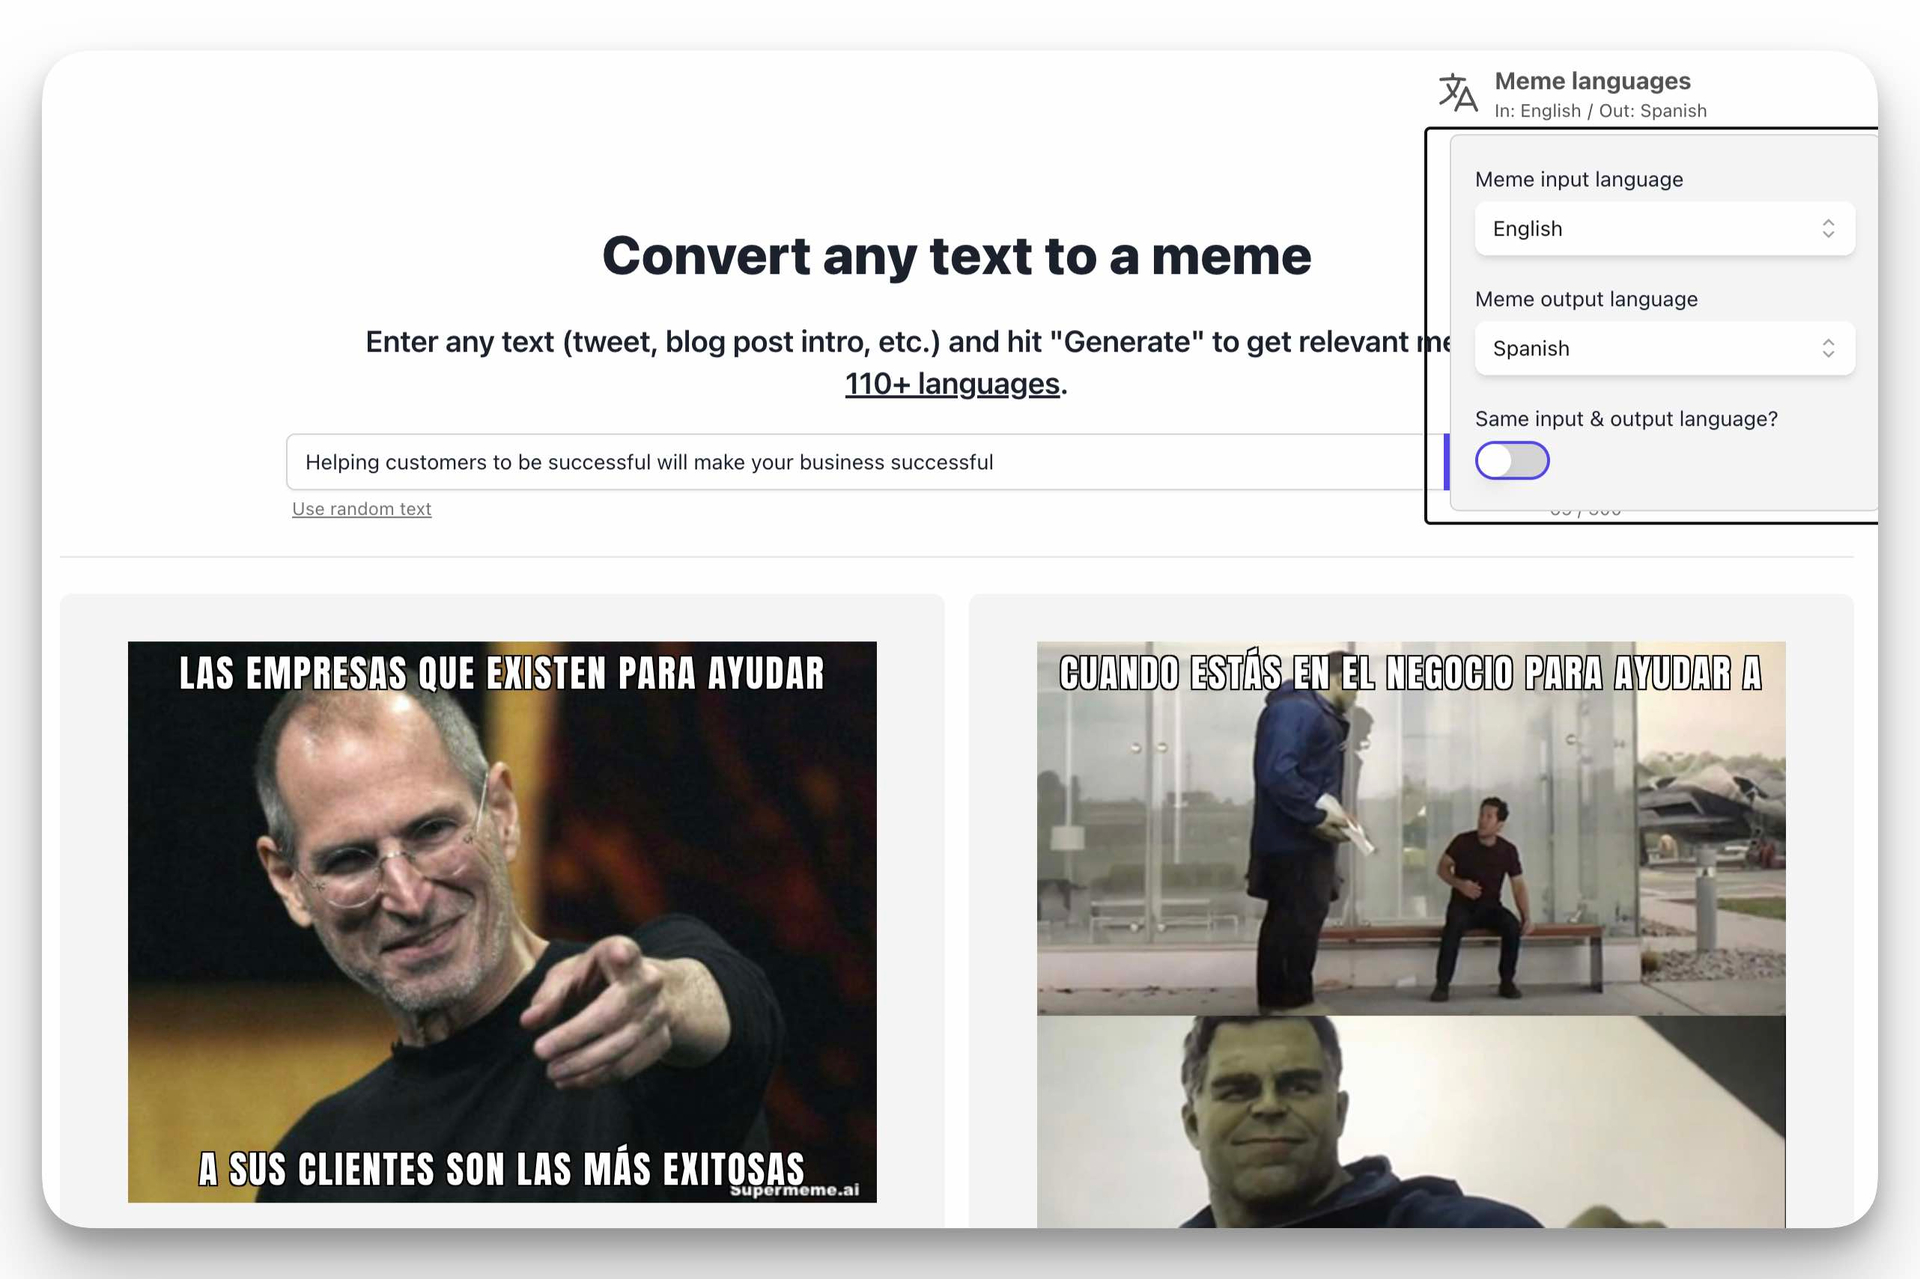 Creating Memes Just Got Easier With Our AI Meme Generator